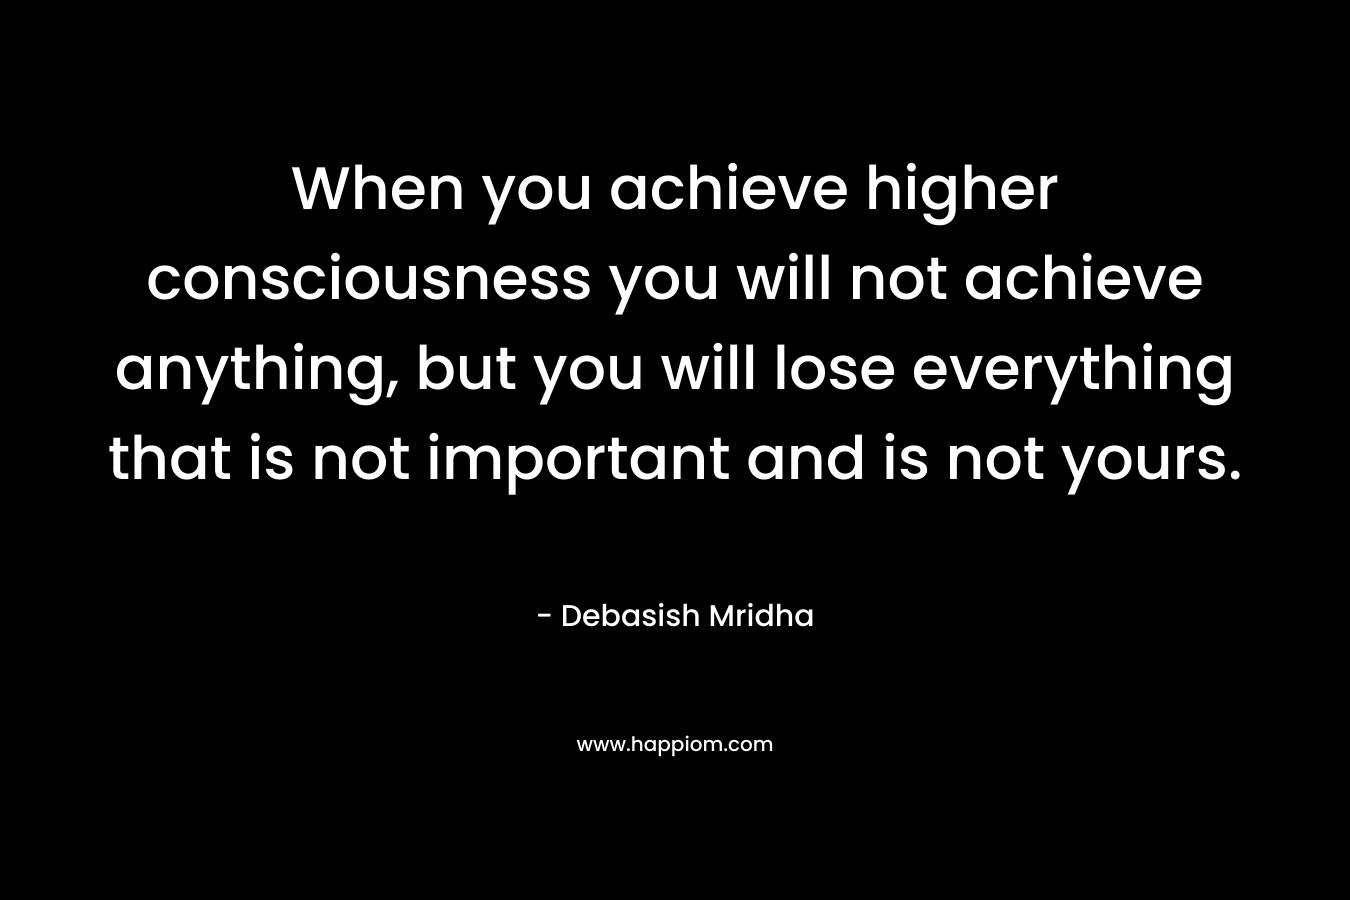 When you achieve higher consciousness you will not achieve anything, but you will lose everything that is not important and is not yours.